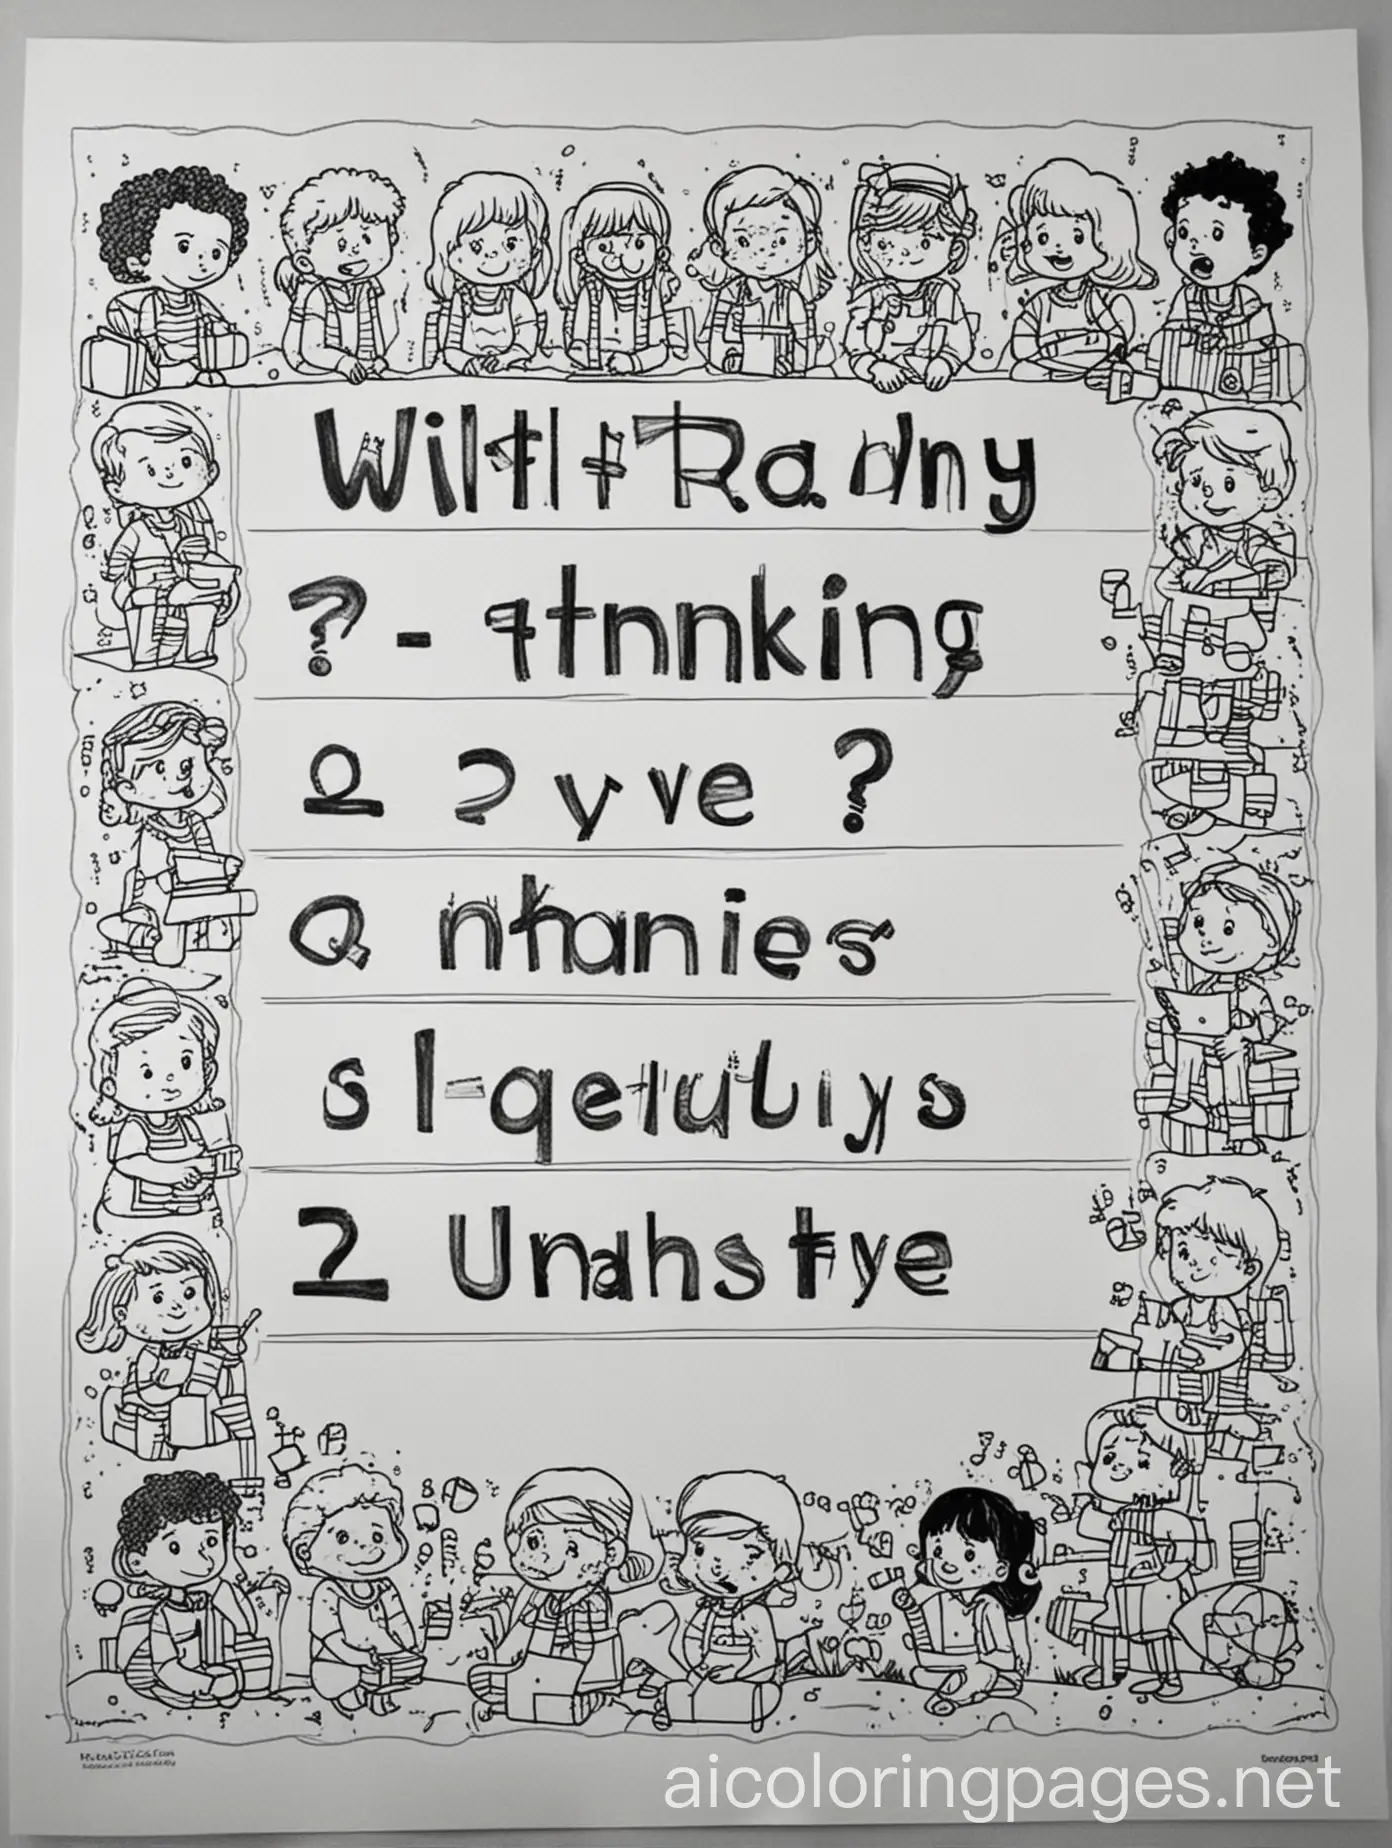 Kids thinking together with some questions mark in the photo with letters in the photo , Coloring Page, black and white, line art, white background, Simplicity, Ample White Space. The background of the coloring page is plain white to make it easy for young children to color within the lines. The outlines of all the subjects are easy to distinguish, making it simple for kids to color without too much difficulty